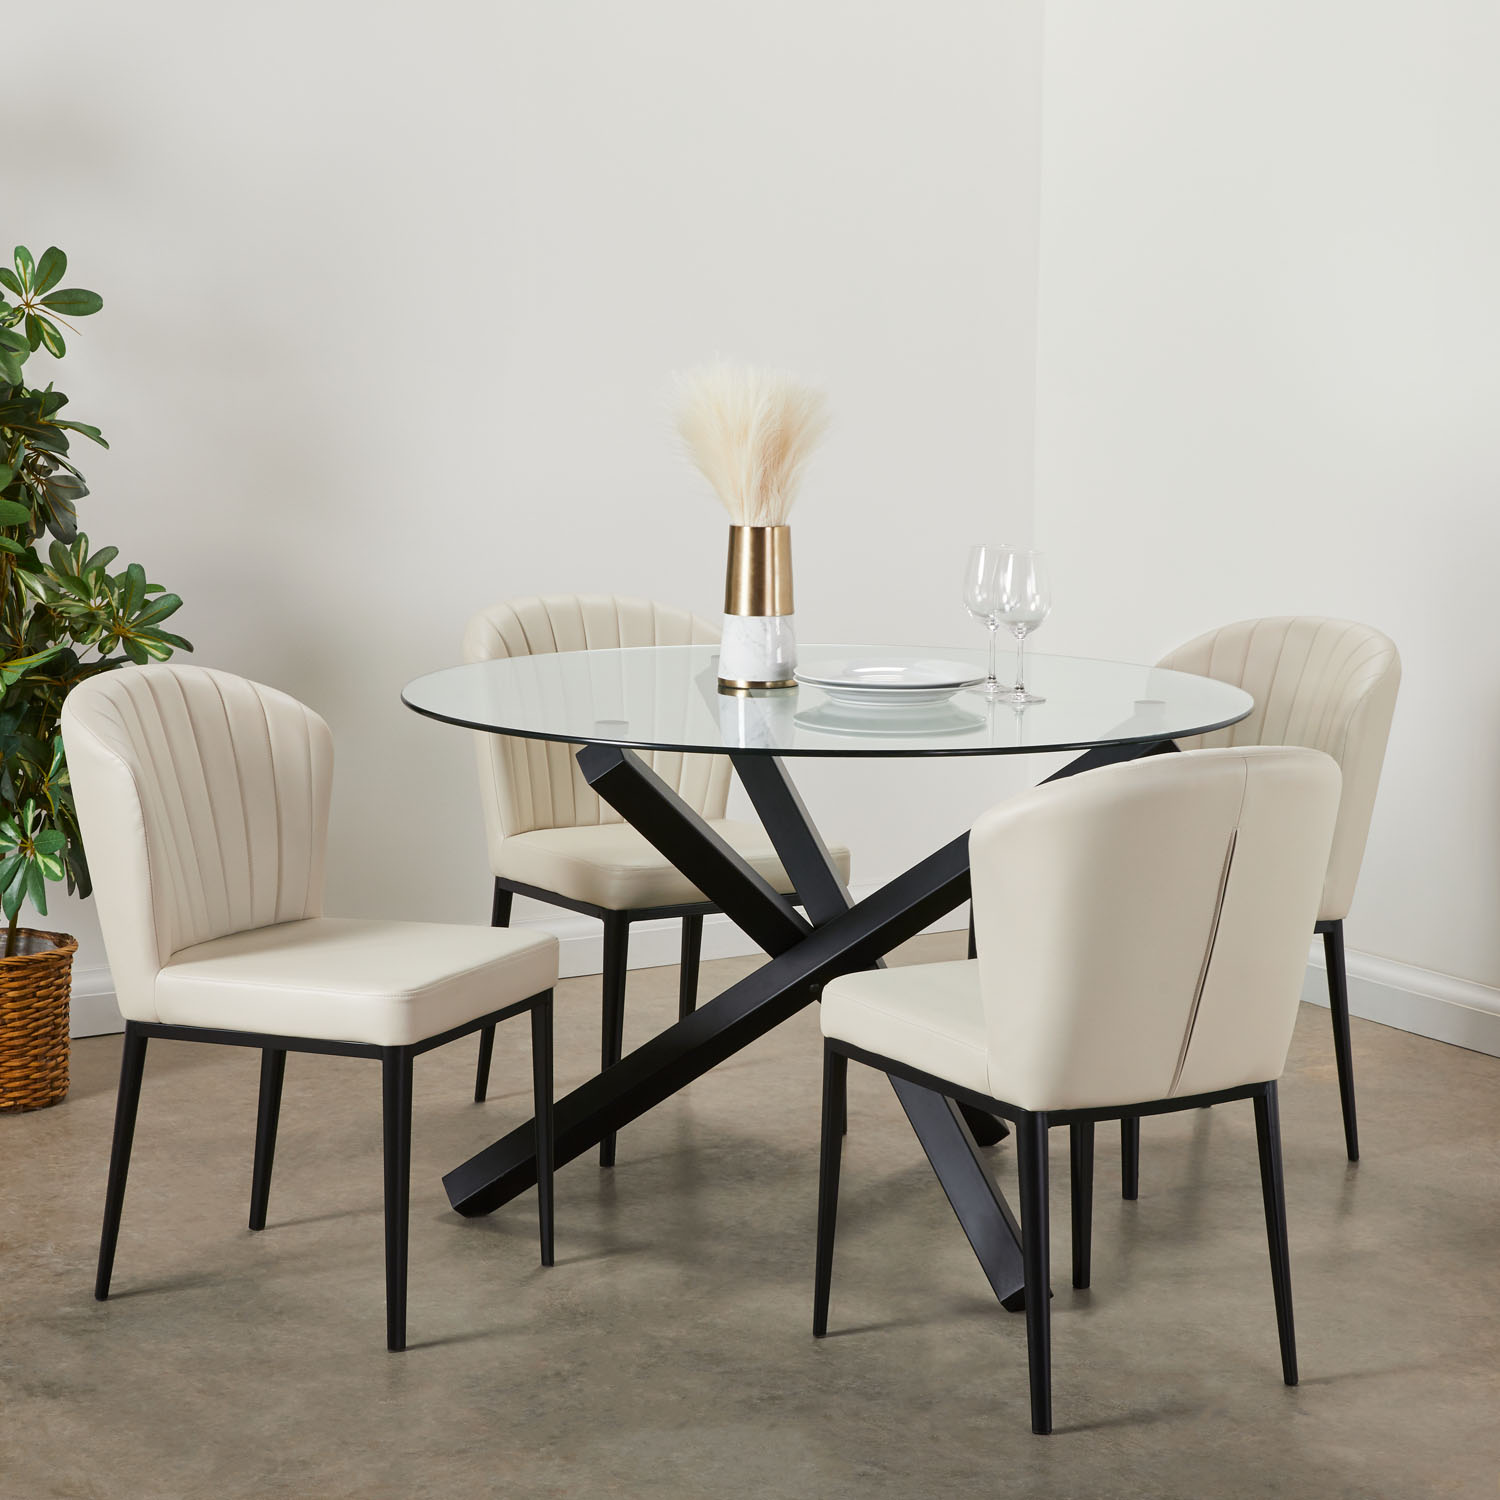 Shell Dining Chair: Taupe Leatherette